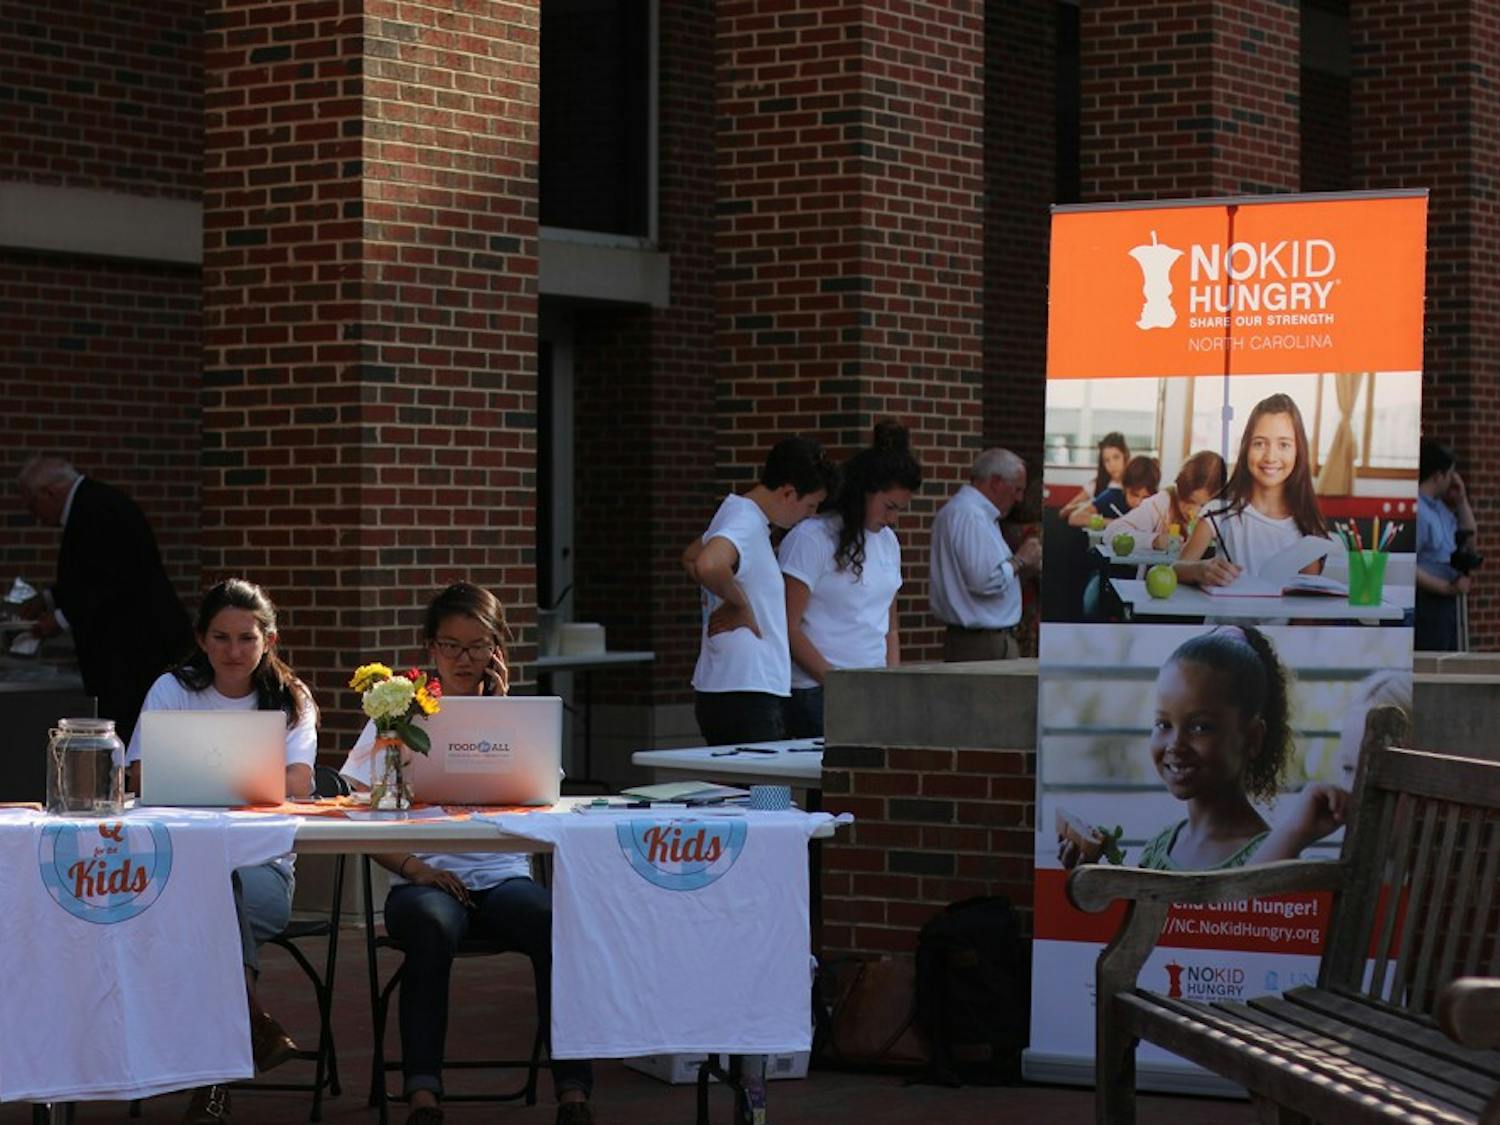 The campus organization, Q for the Kids, put on a fundraiser to raise funds for the “No Kid Hungry” project which is striving to alleviate hunger across North Carolina.